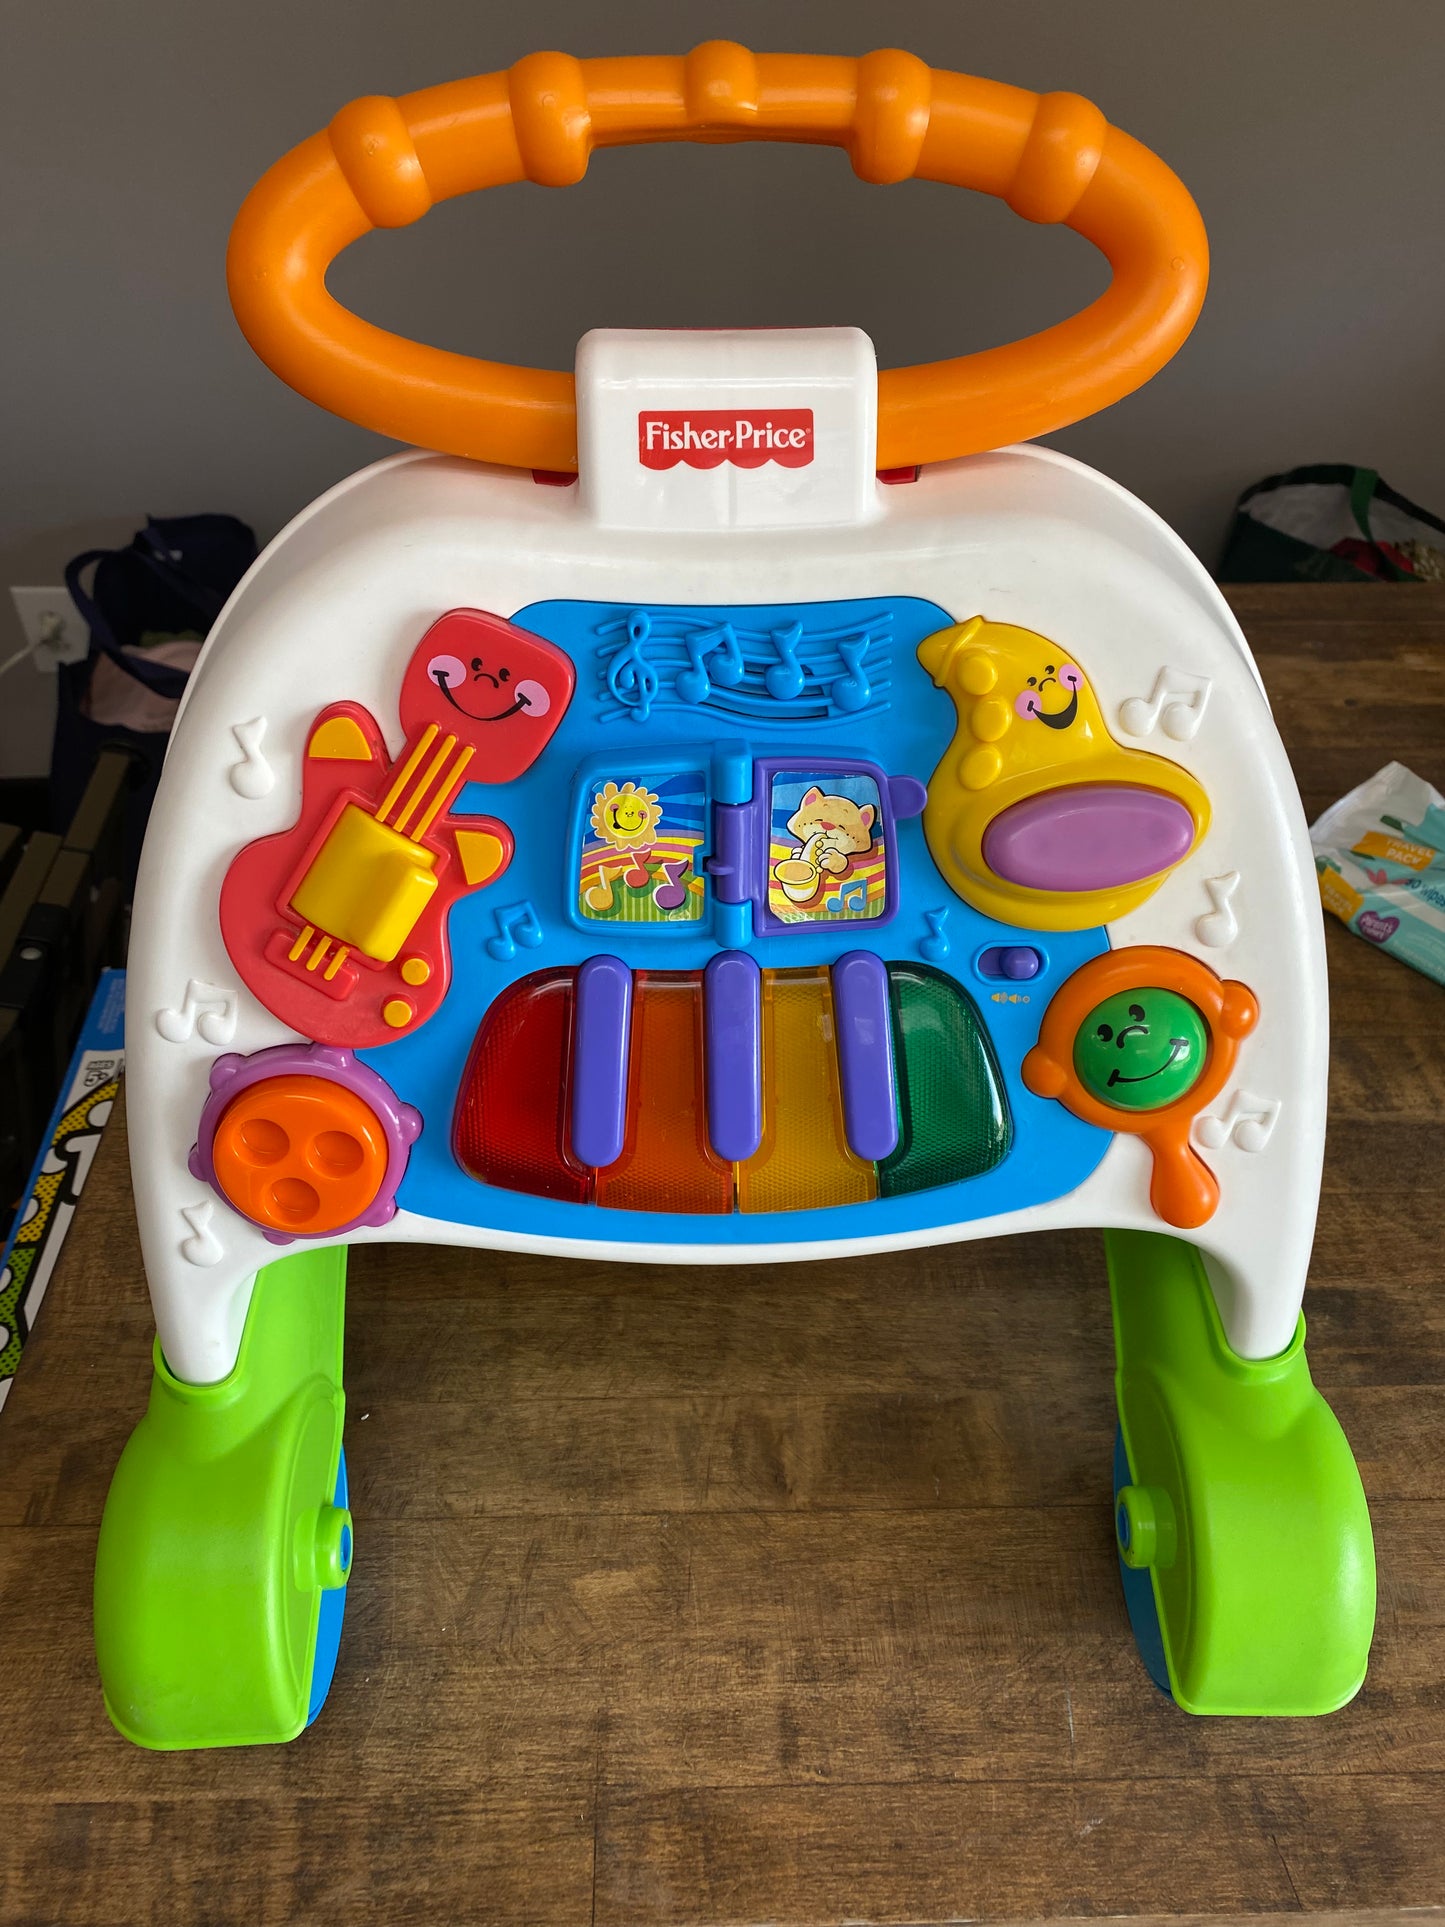 Fisher-Price 2-in-1 Singing Band Walker Toy